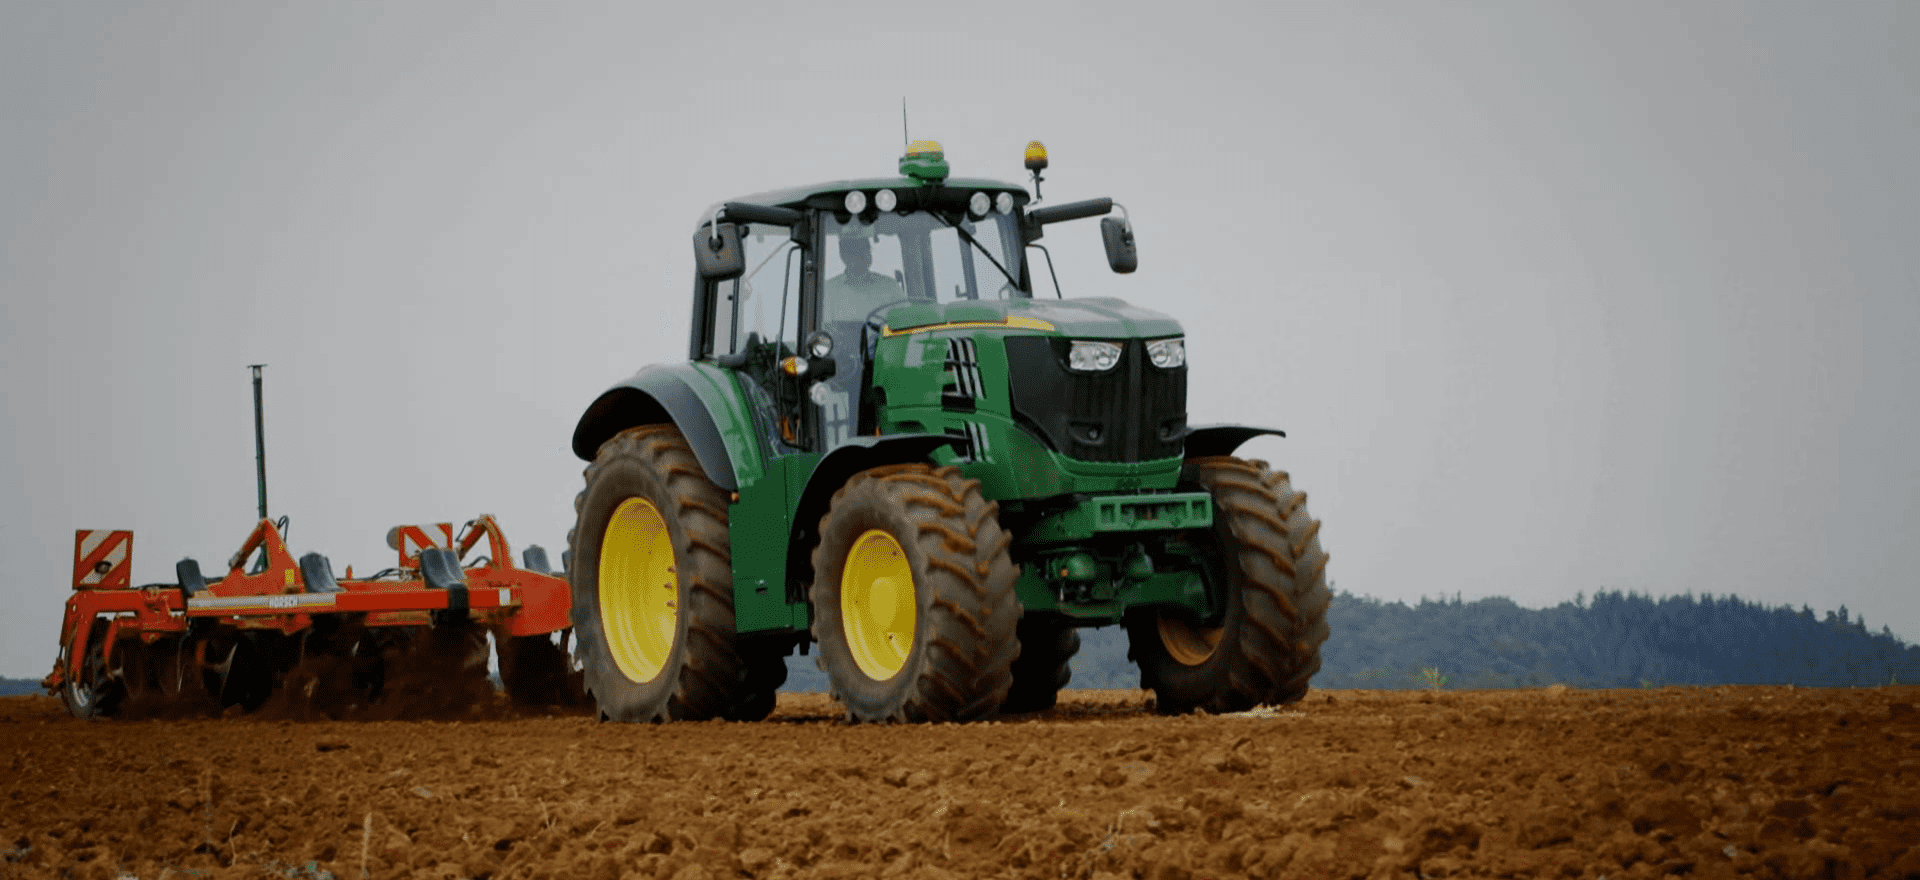 John Deere announces first electric tractor